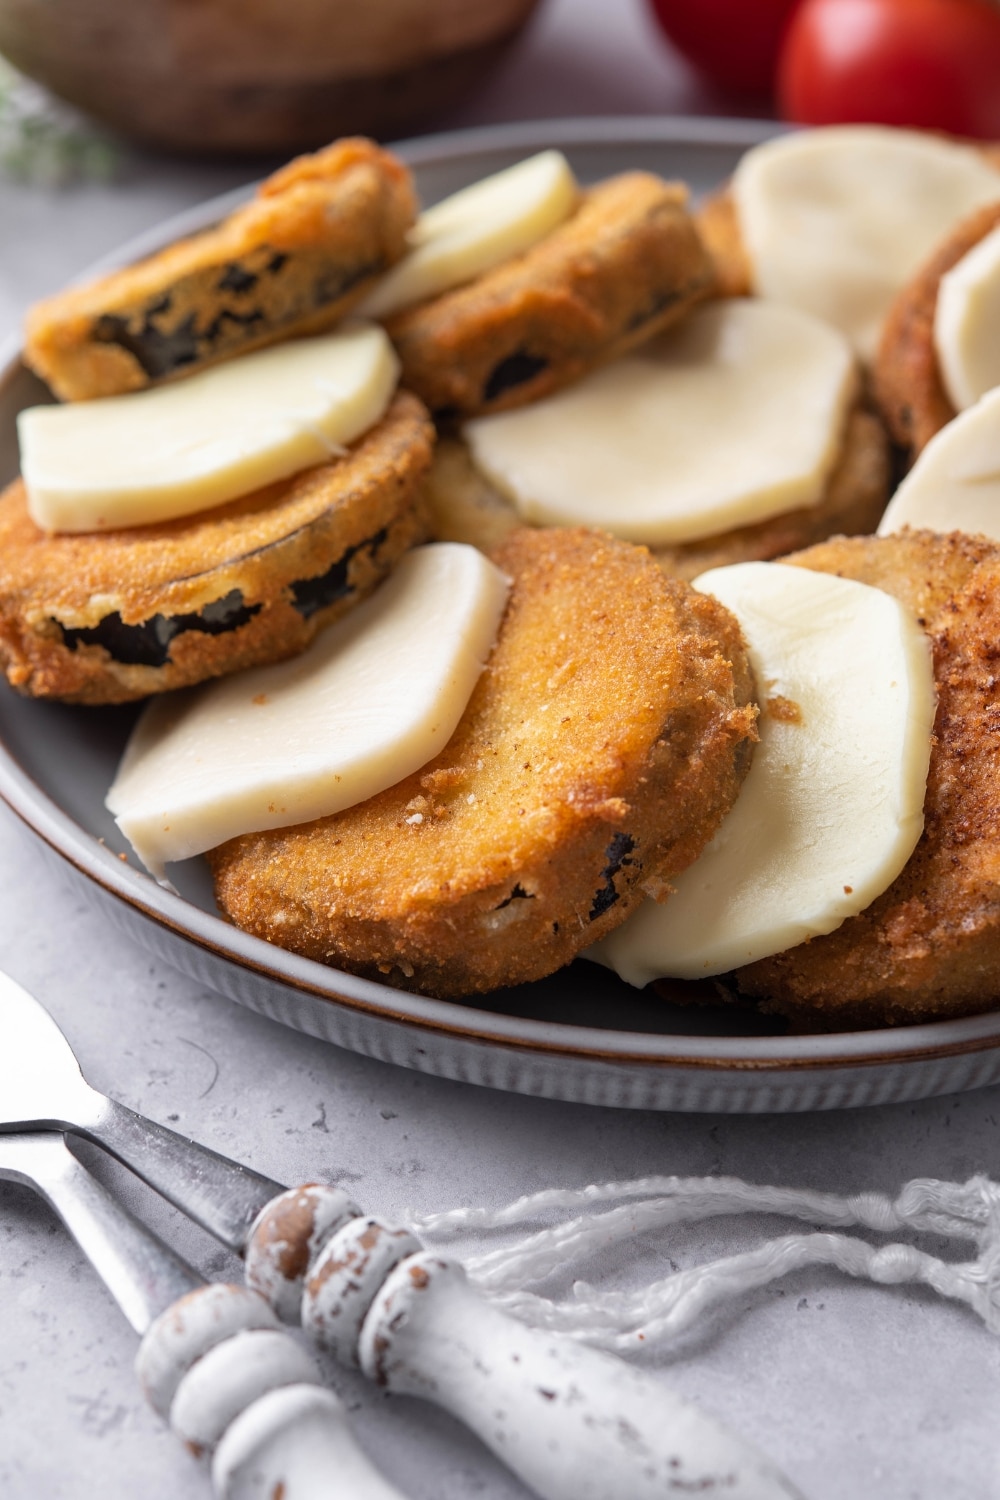 A closer look at fried eggplant slices with mozzarella cheese on a plate.